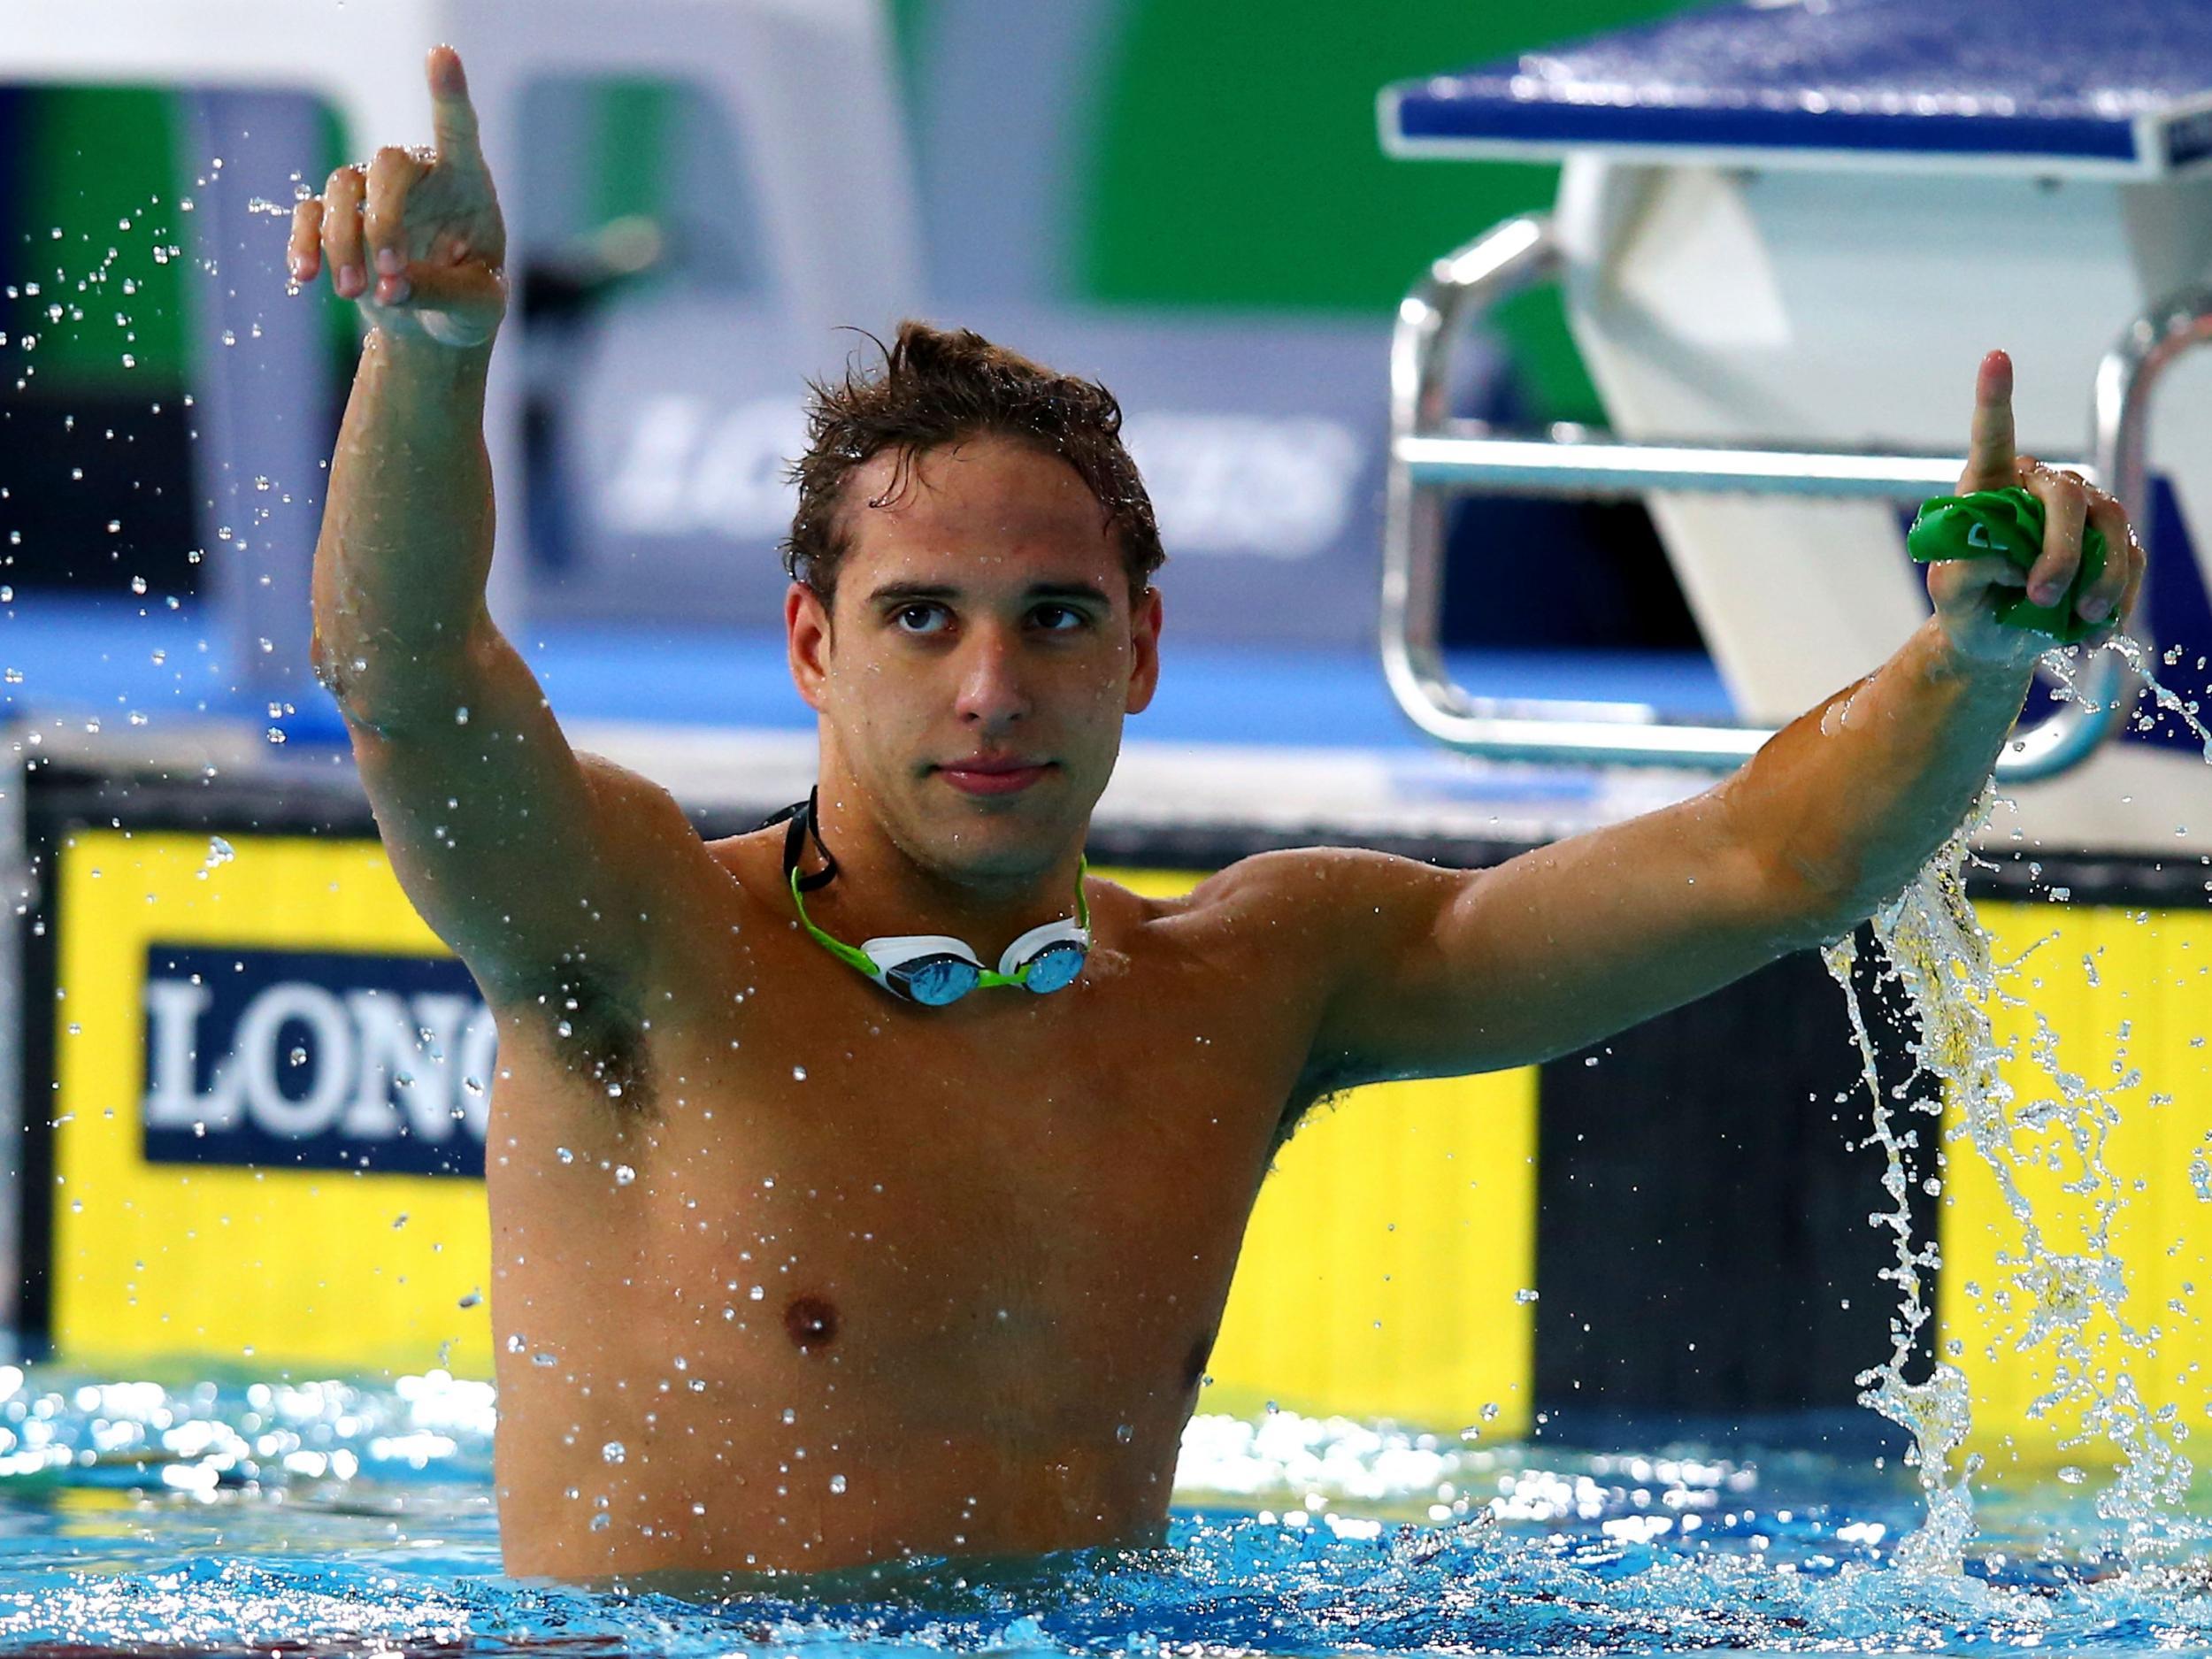 Chad le Clos of South Africa celebrates winning the gold medal in the Men's 100m Butterfly Final at Tollcross International Swimming Centre during day five of the Glasgow 2014 Commonwealth Games